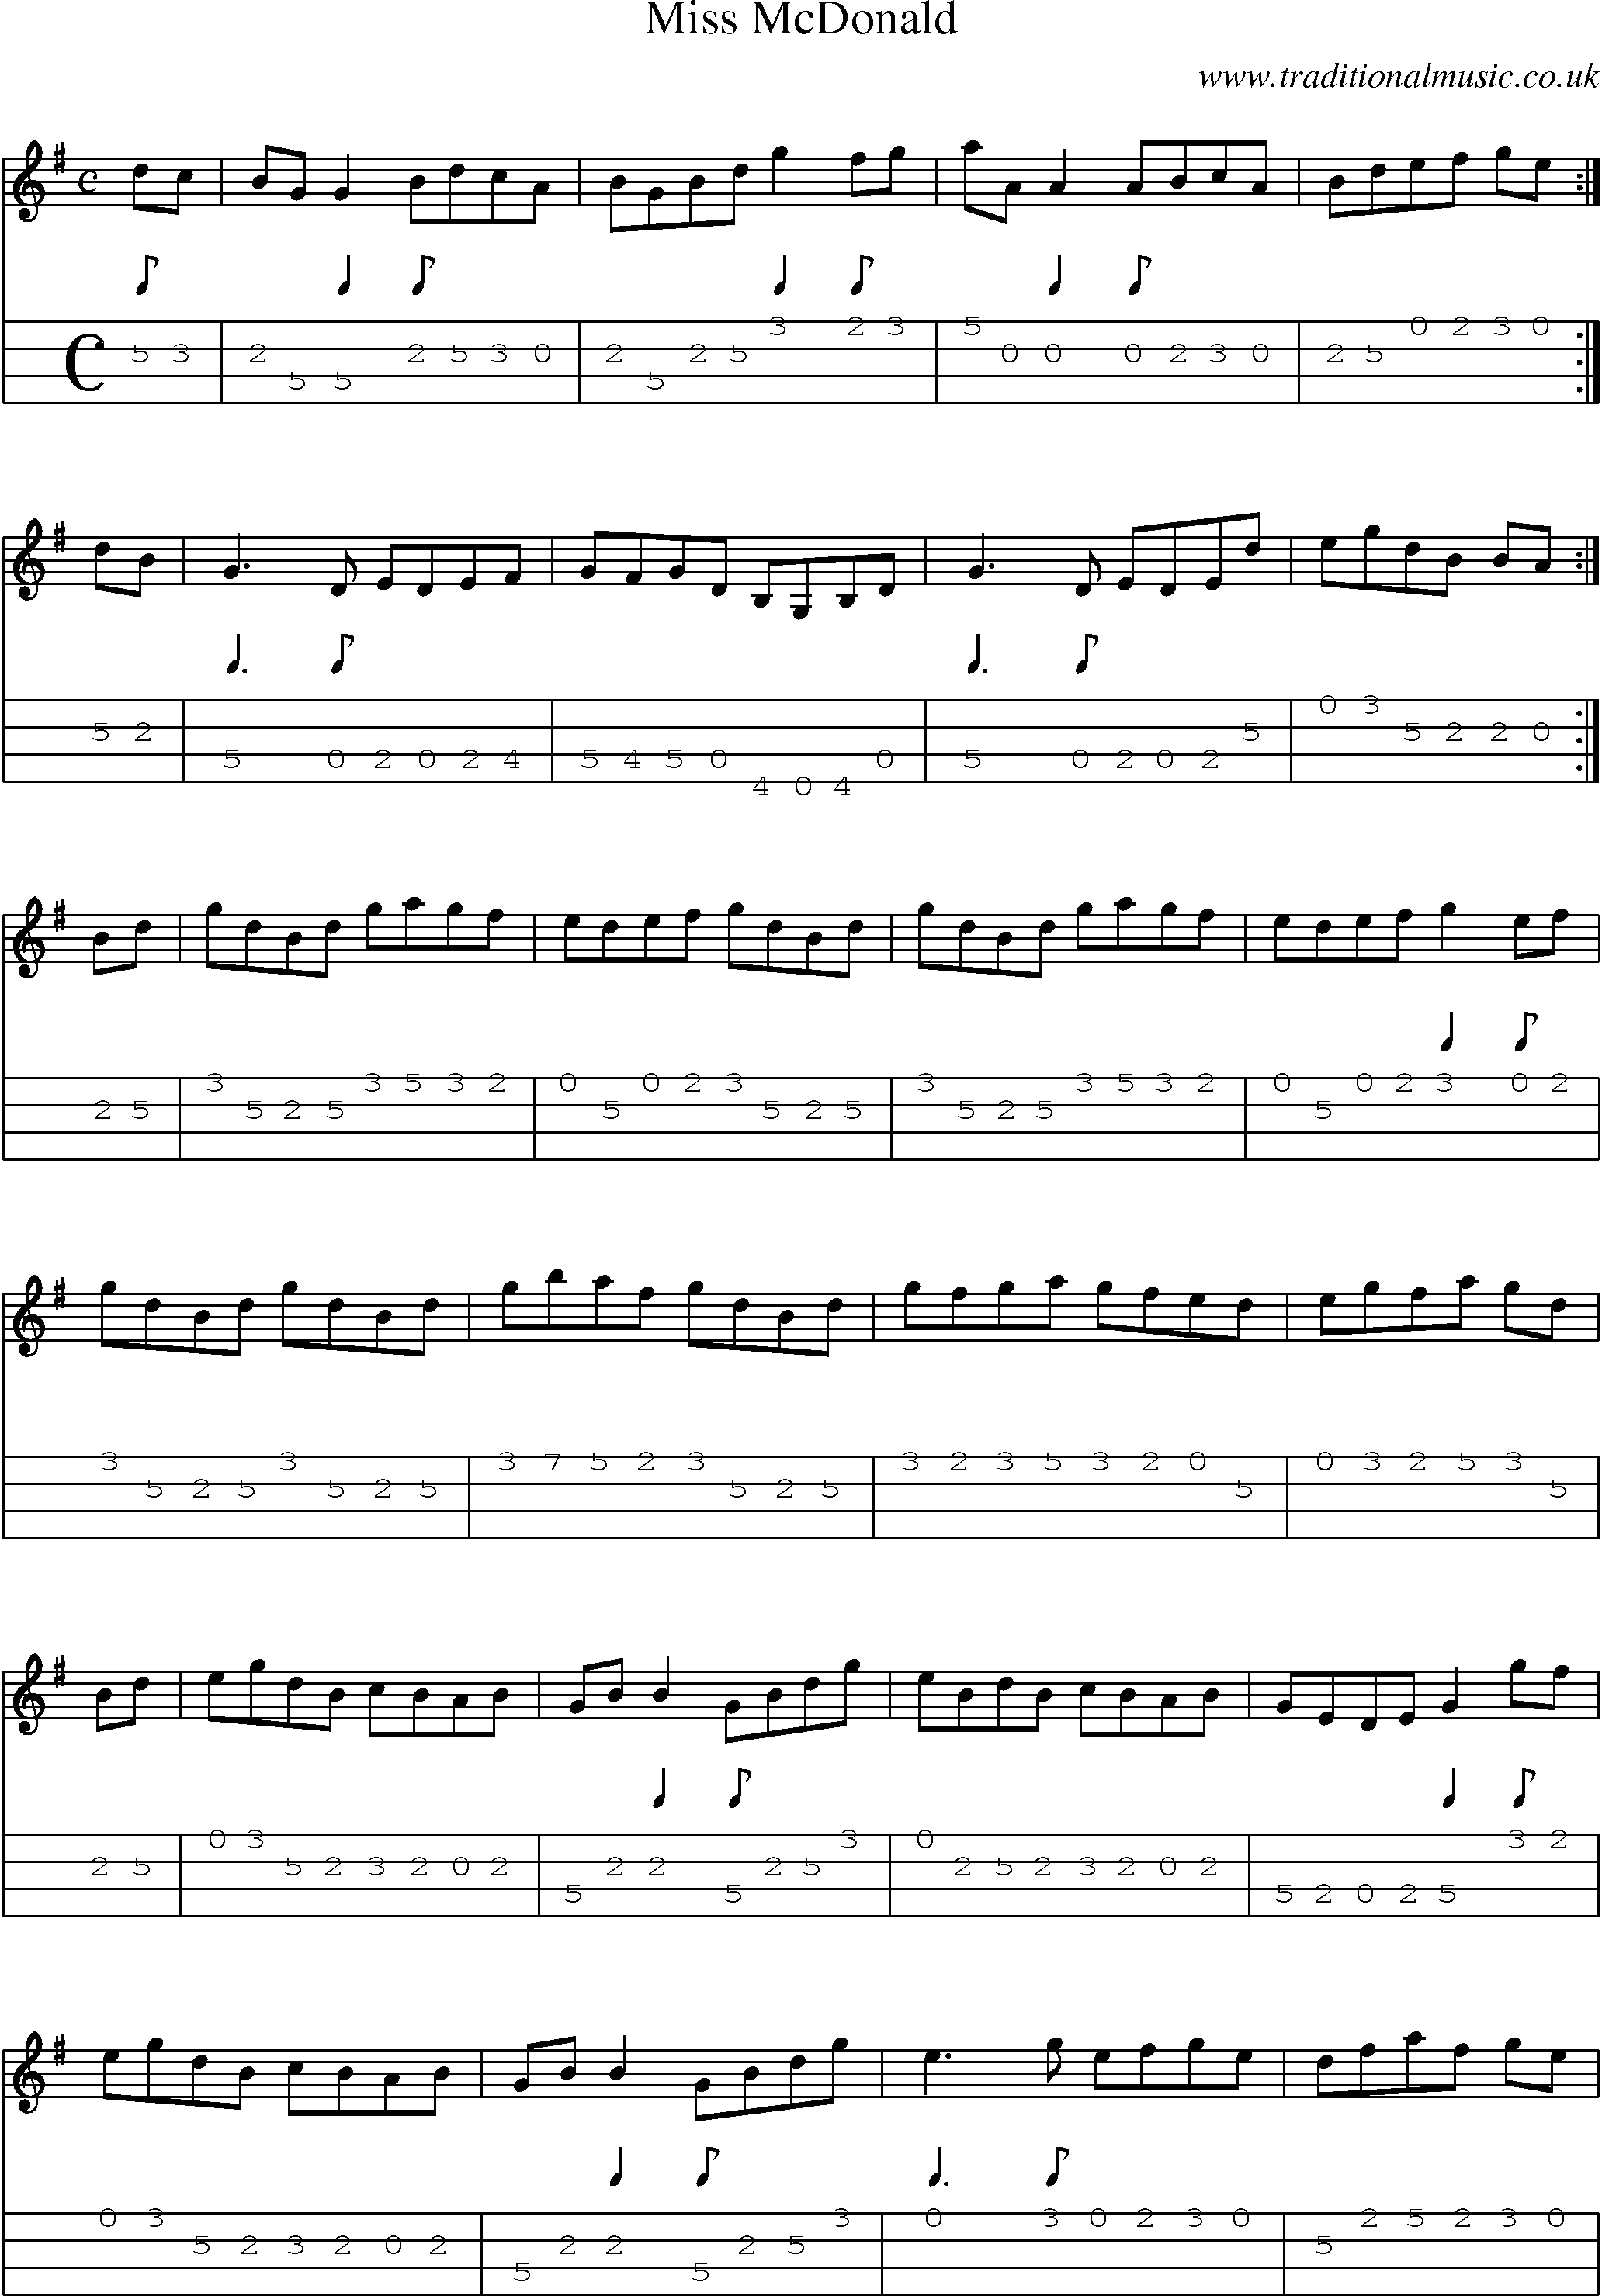 Music Score and Mandolin Tabs for Miss Mcdonald